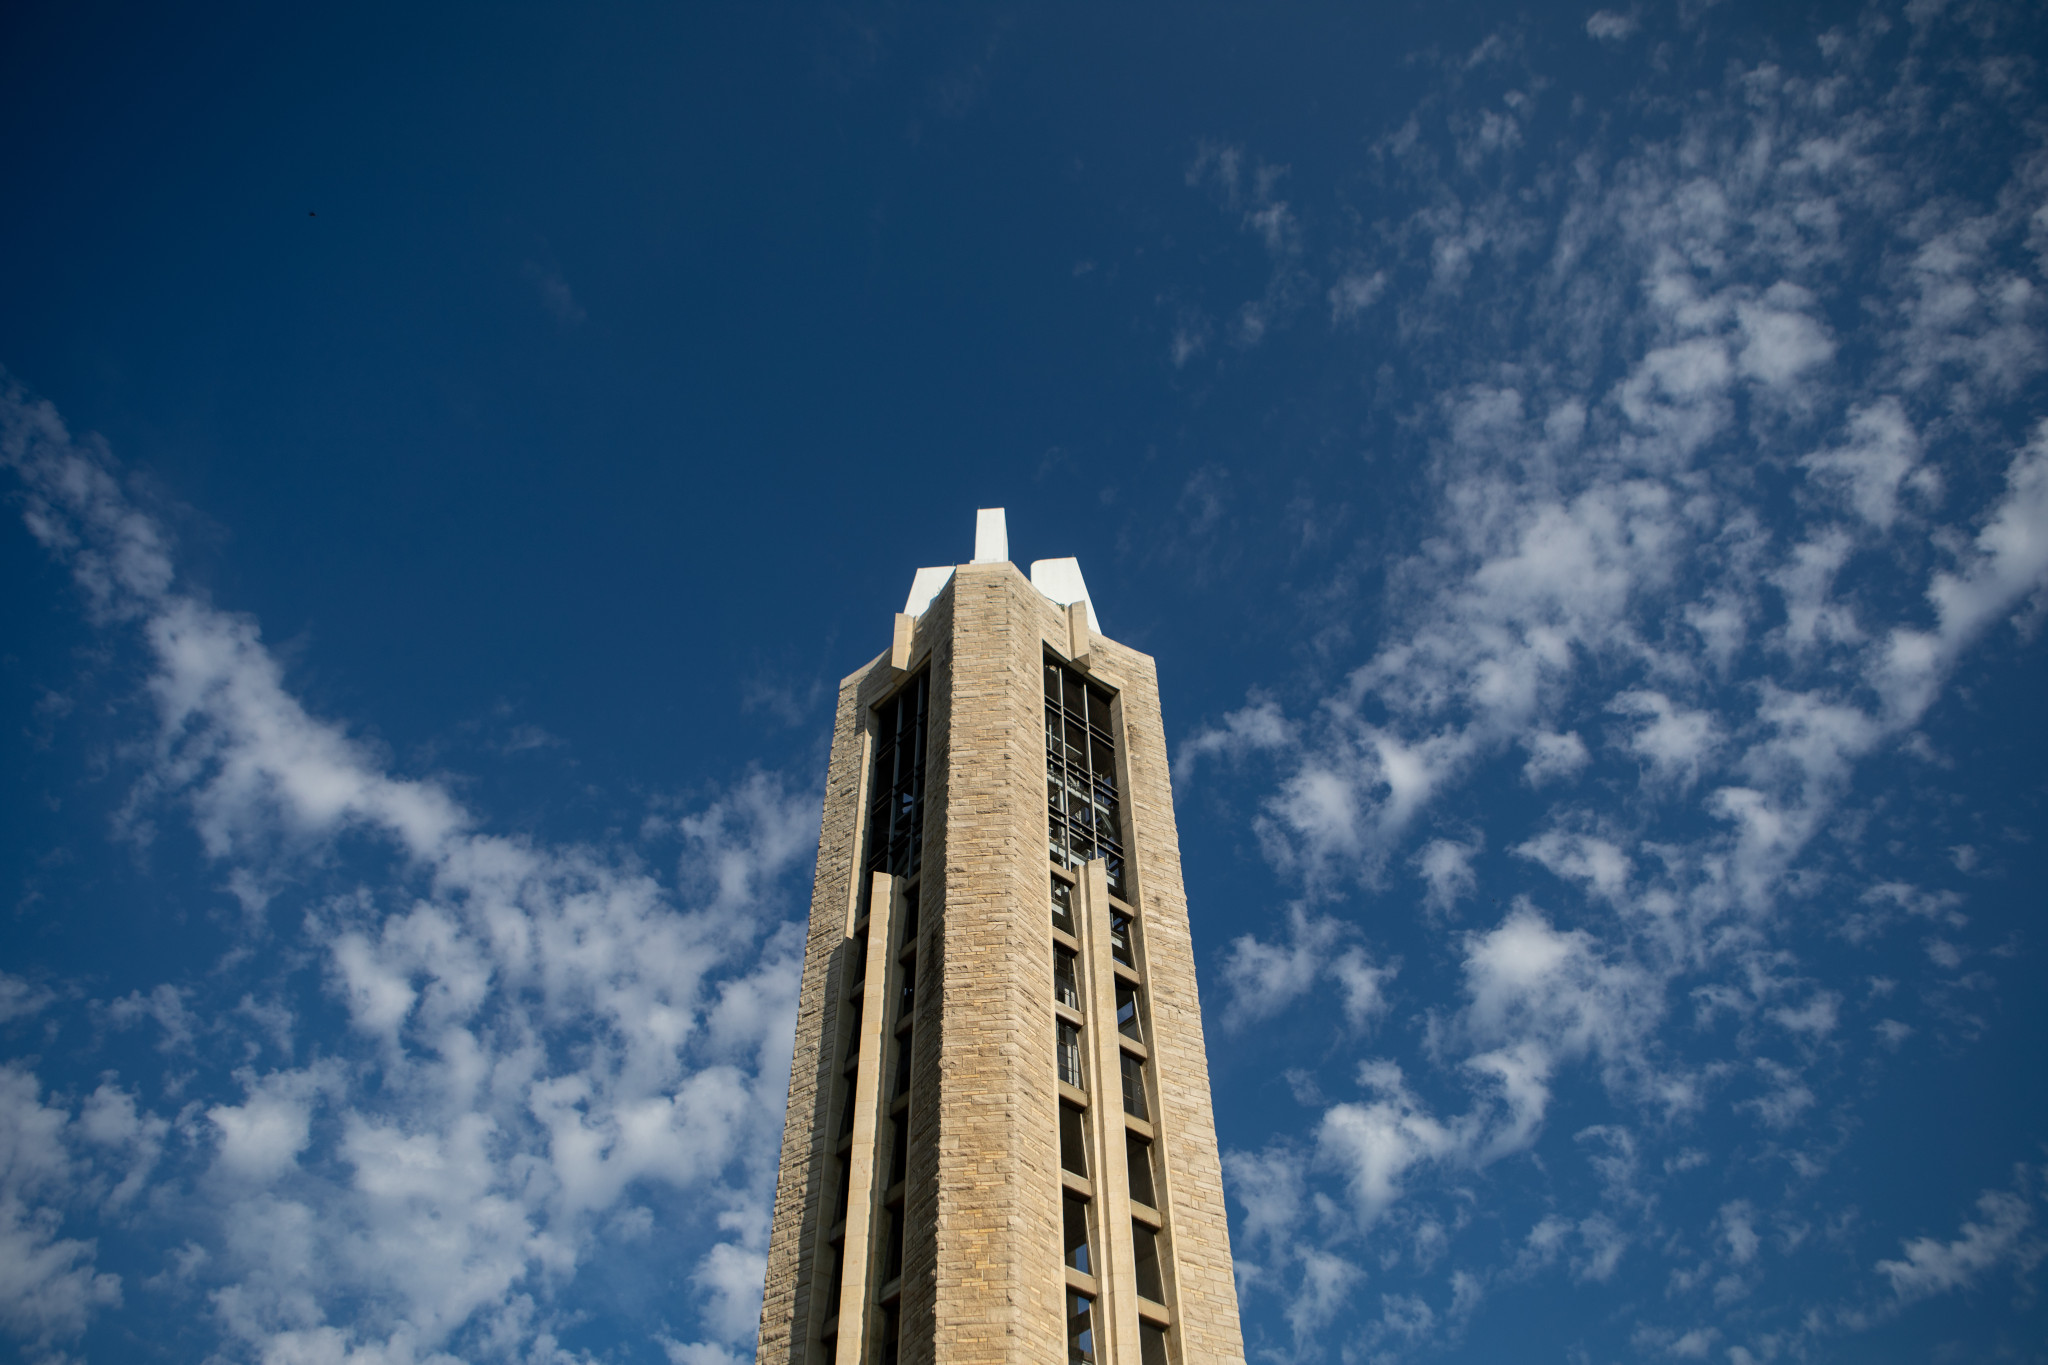 campanile with blue sky and a few clouds